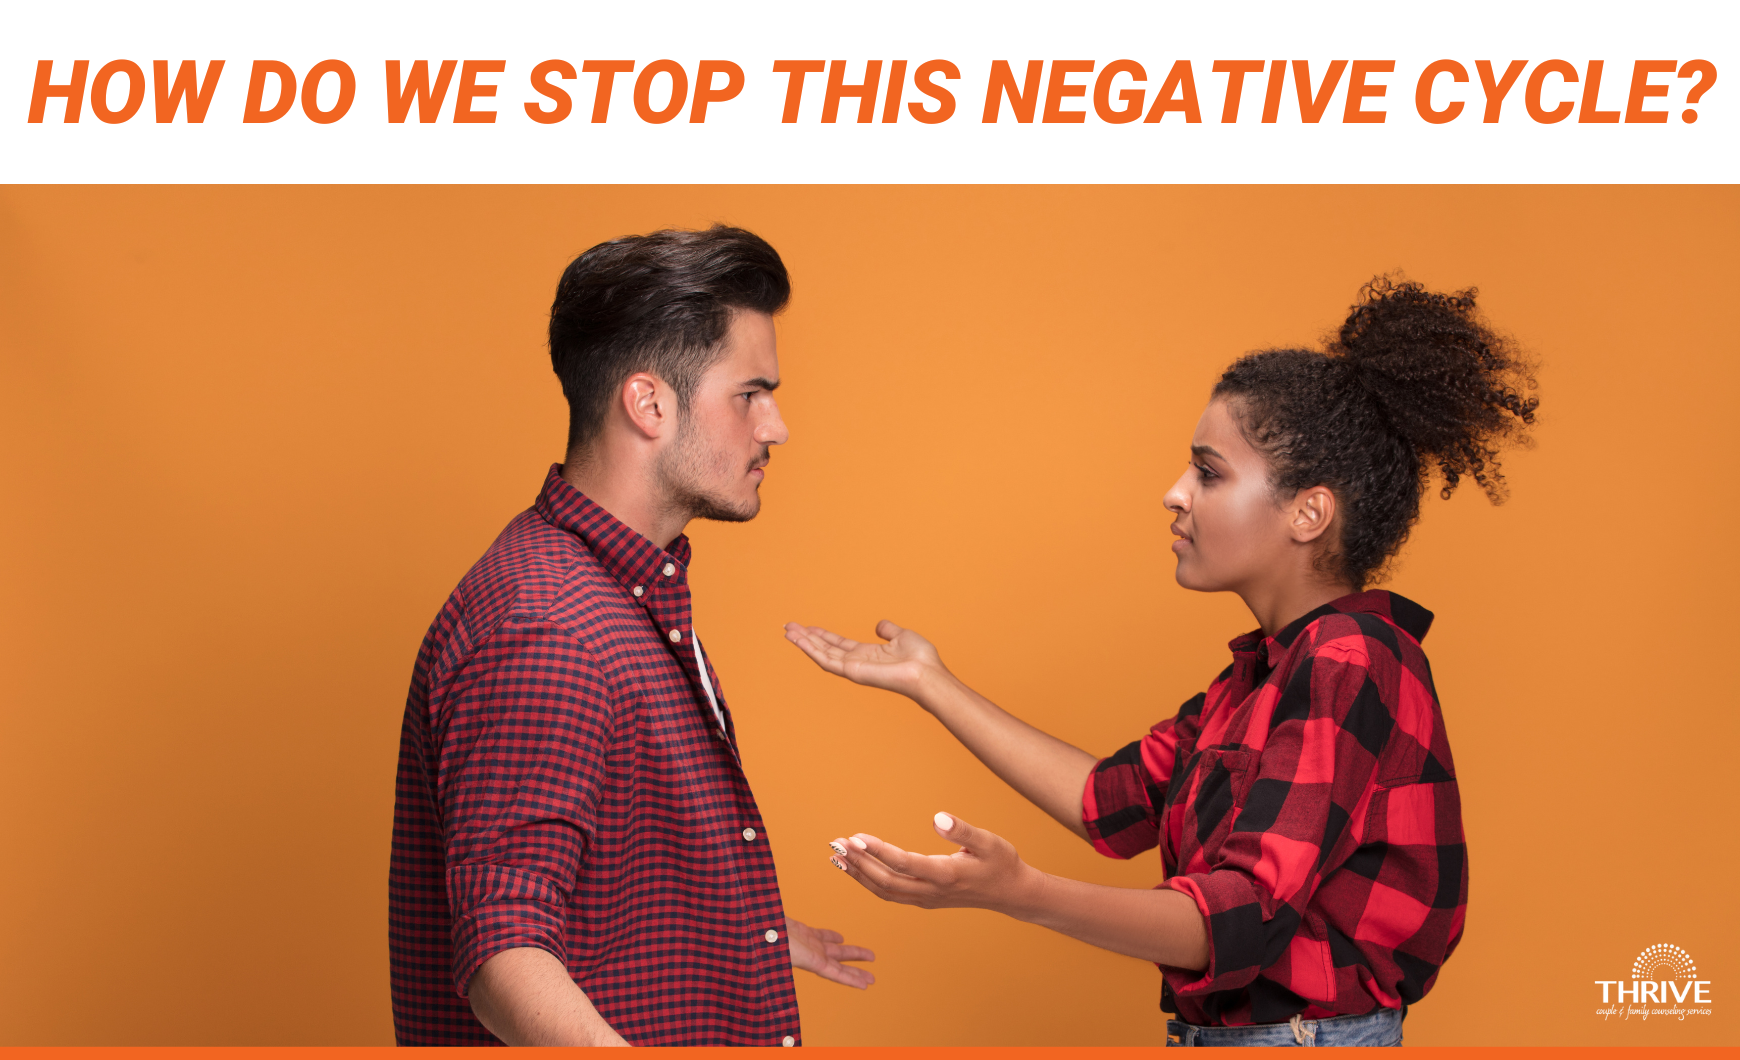 Dark orange text on a white background that reads "How Do We Stop This Negative Cycle?" over a stock photo of a couple standing in front of an orange wall, arguing. The logo for Thrive Couple & Family Counseling services is in the bottom right corner. At the very bottom of the graphic there is a thin horizontal dark orange line running across the image.